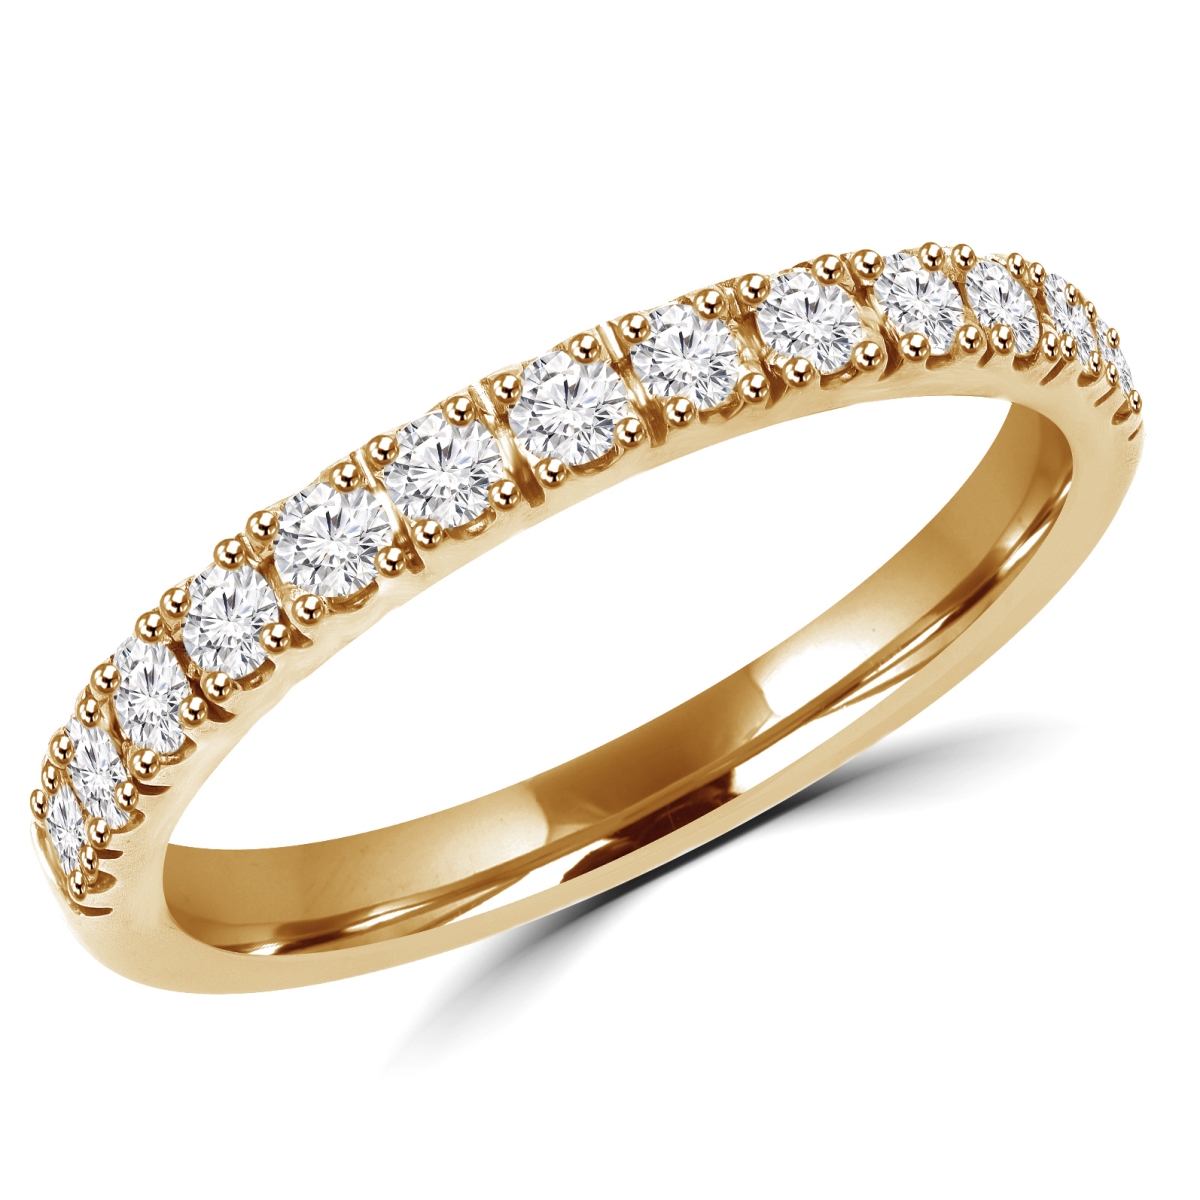 Picture of Majesty Diamonds MD180187-6.75 0.3 CTW Round Diamond Semi-Eternity Wedding Band Ring in 14K Yellow Gold - Size 6.75